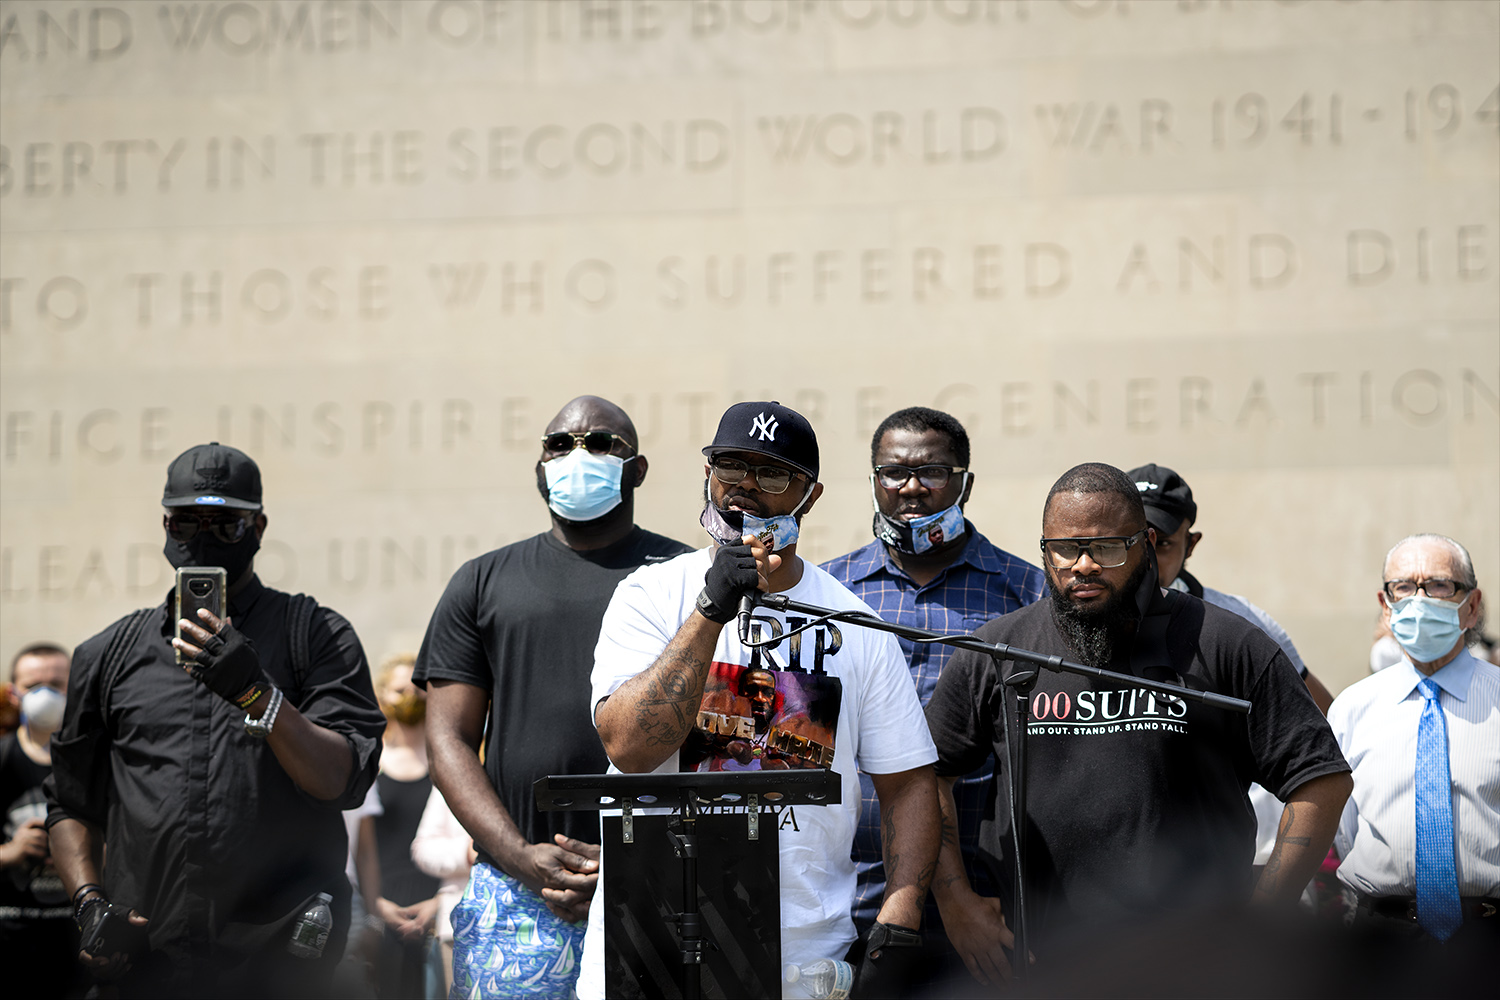 Closing the memorial, Philonise Floyd, the brother of George Floyd, encourages the protestors to continue fighting peacefully. (Photo by Tsubasa Berg)